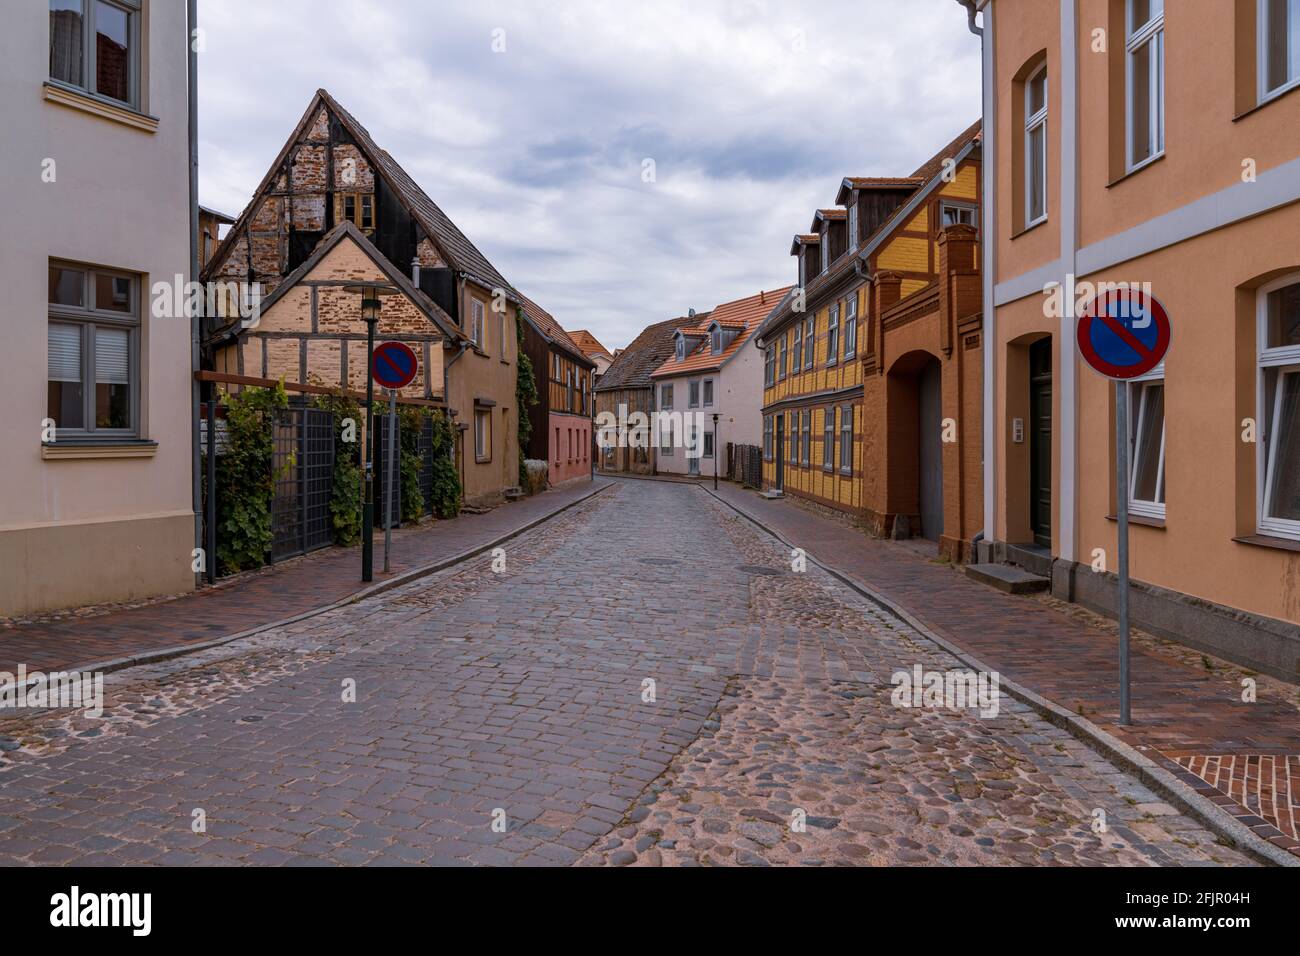 Plau am See, Mecklenburg-Western Pomerania, Germany - June 10 2020: The houses at the empty Market street Stock Photo